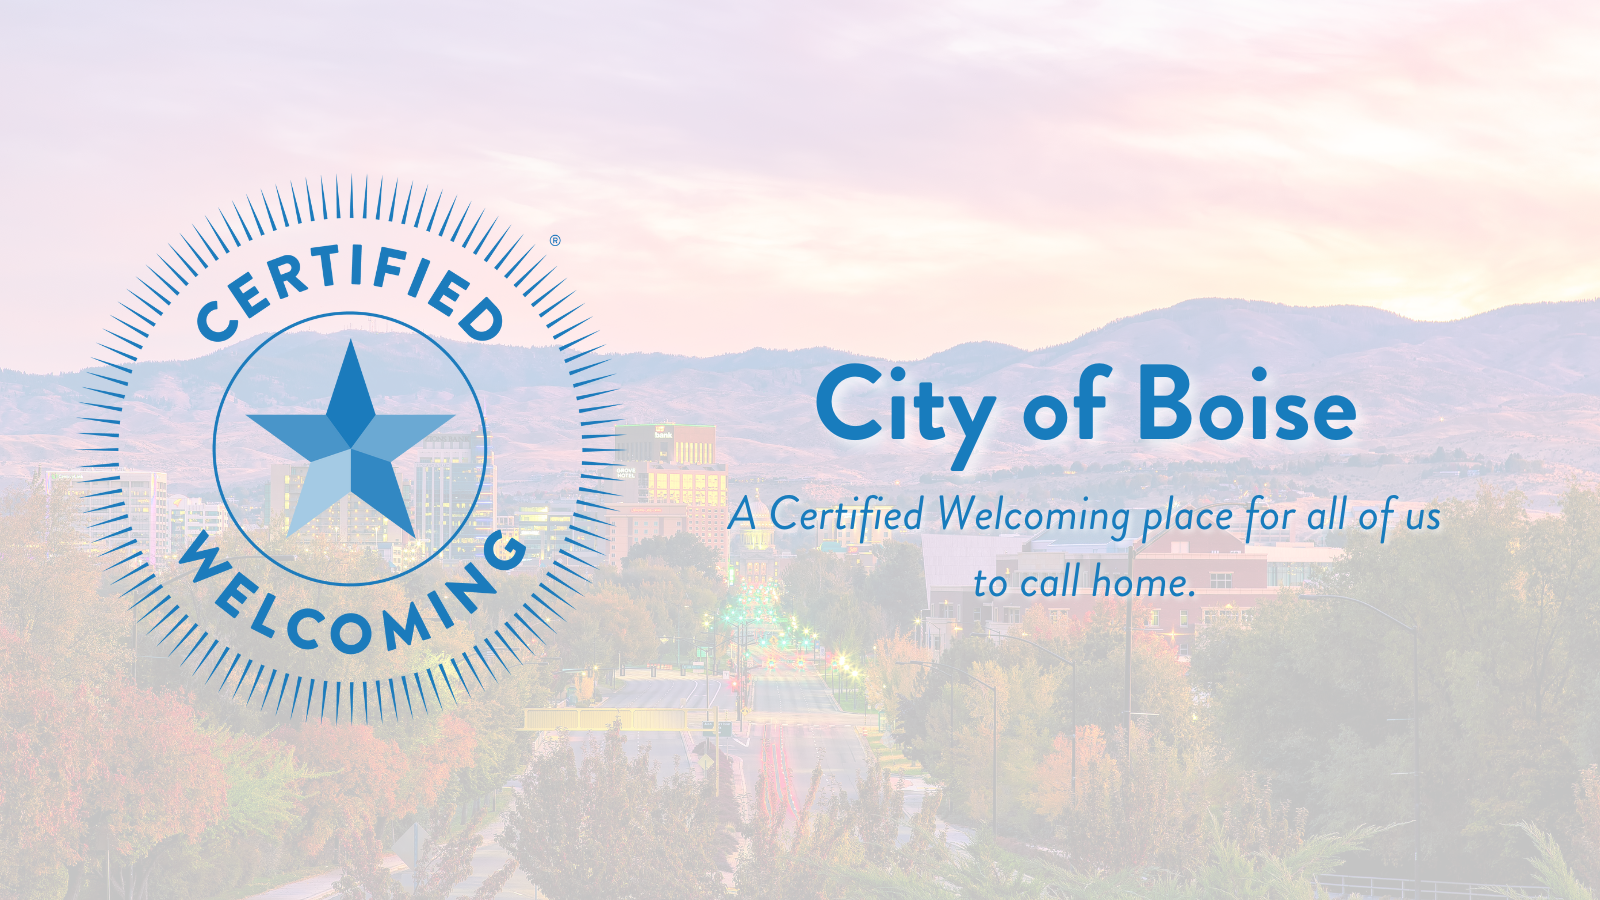 Certified Welcoming logo overlaid on a background featuring a photo of Boise, Idaho. Text on the image says "City of Boise, A Certified Welcoming place for all of us to call home."